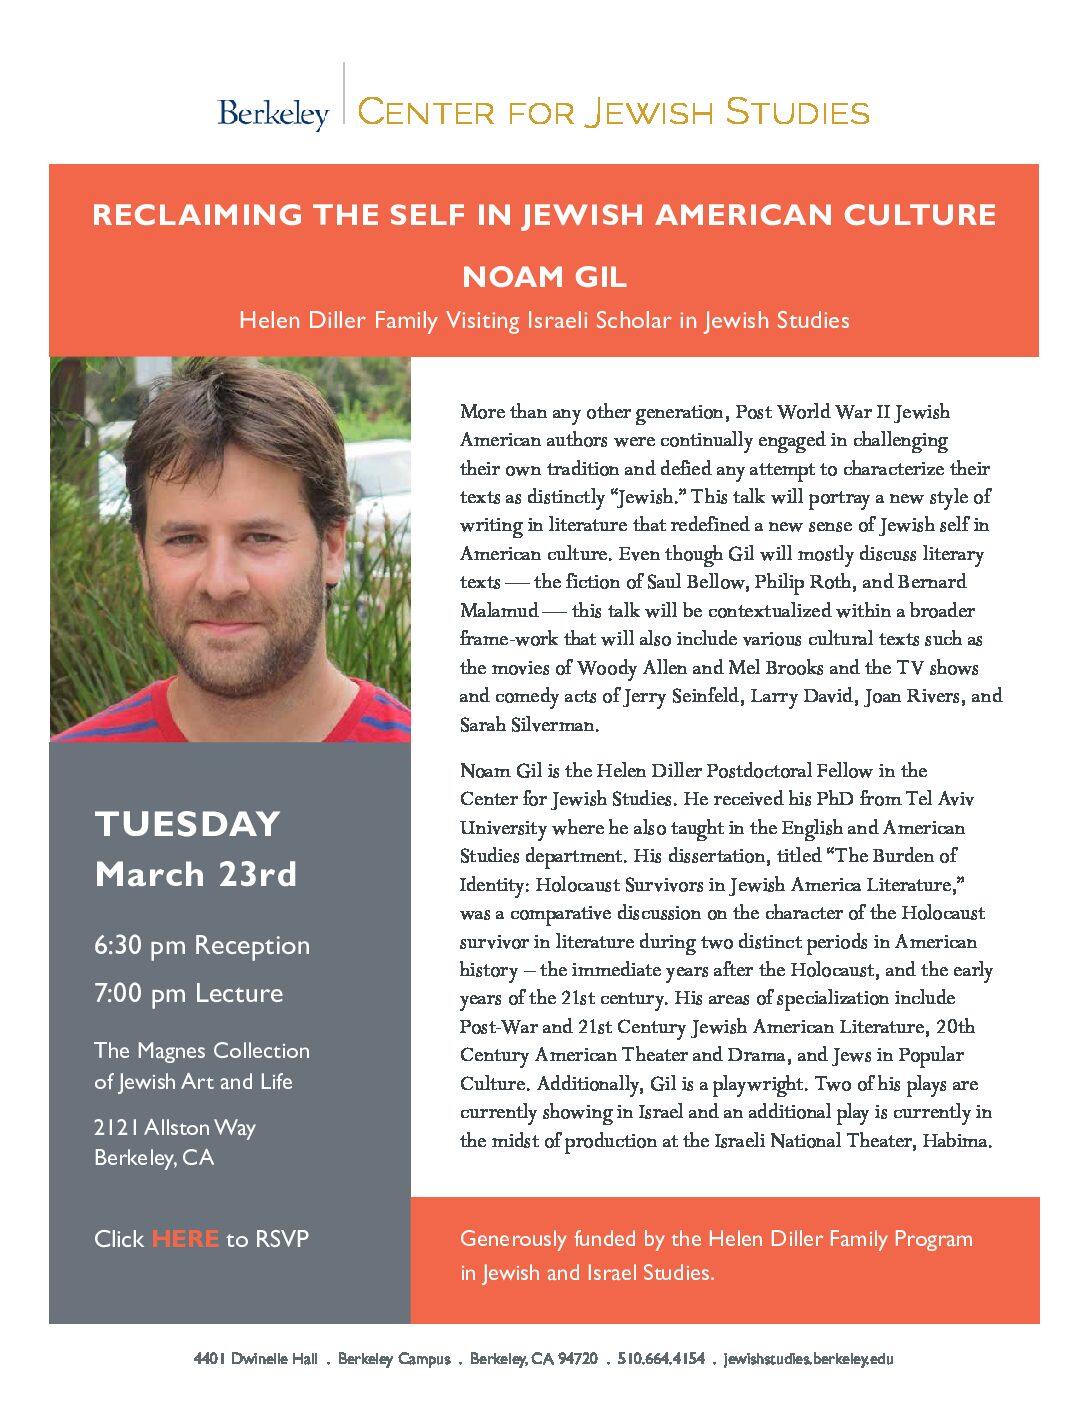 Reclaiming the Self in Jewish American Culture